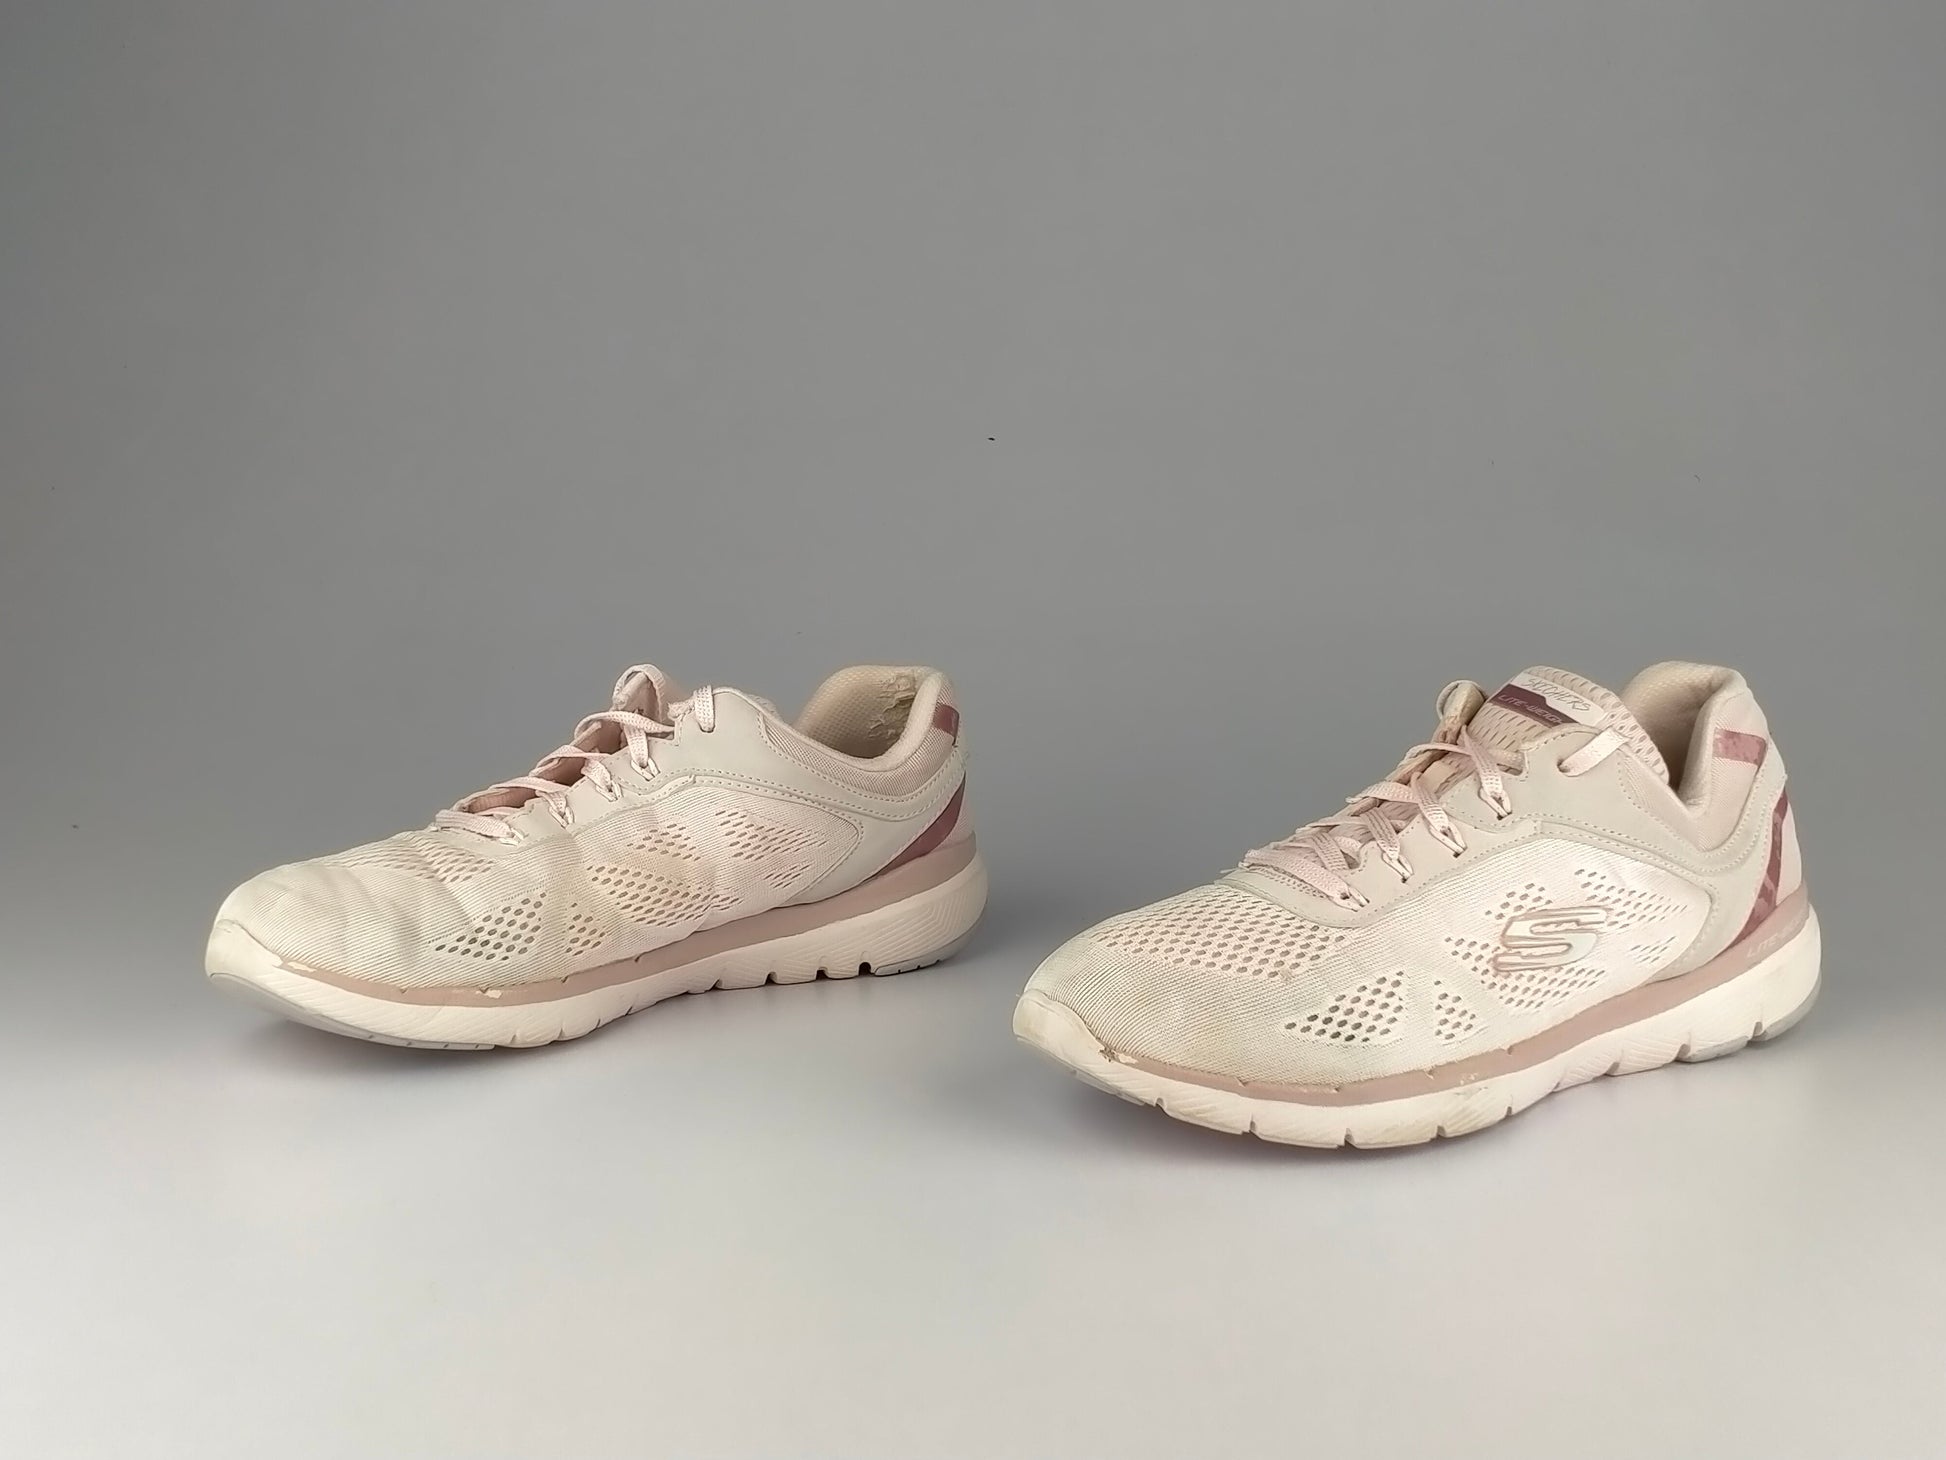 Skechers Flex Appeal 2.0 - Moving Fast 'Baby Pink/Pink'